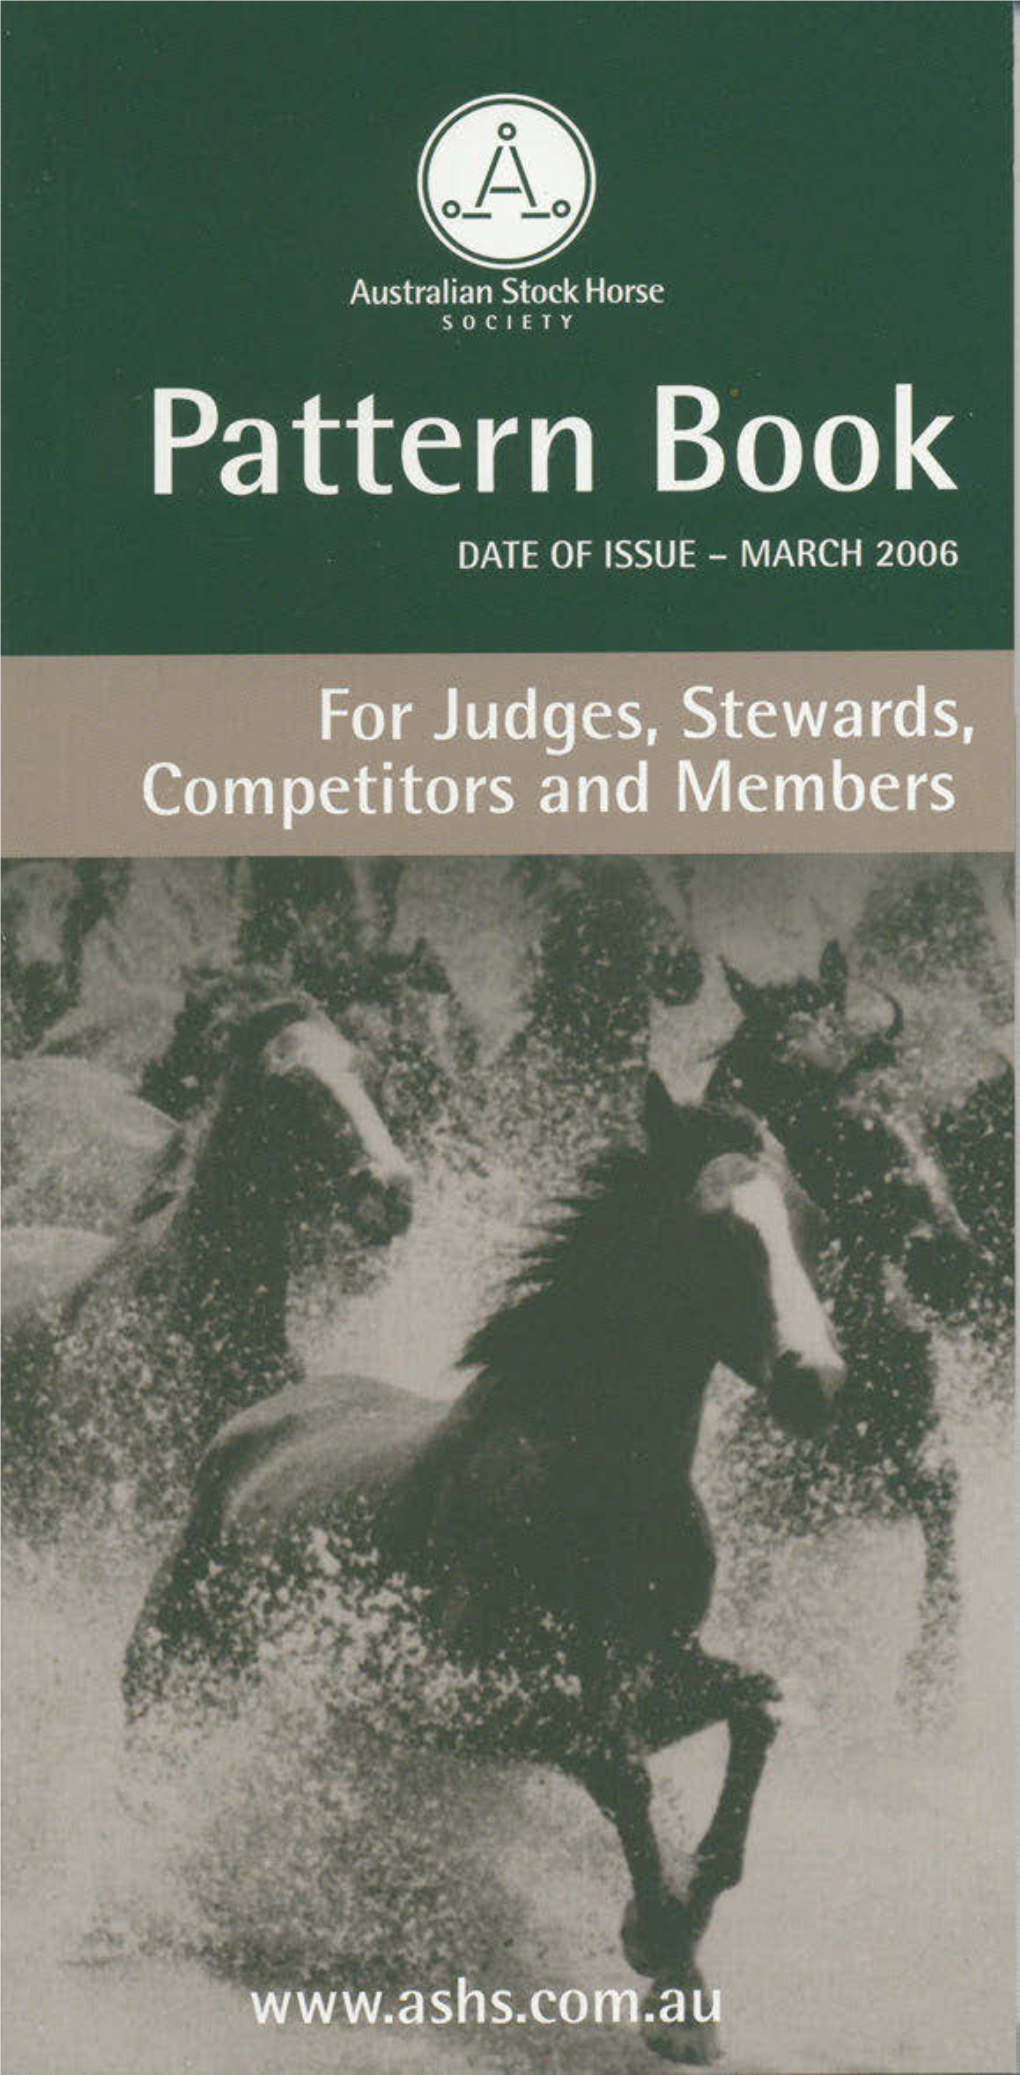 Pattern Book for Judges, Stewards, Competitors and Members